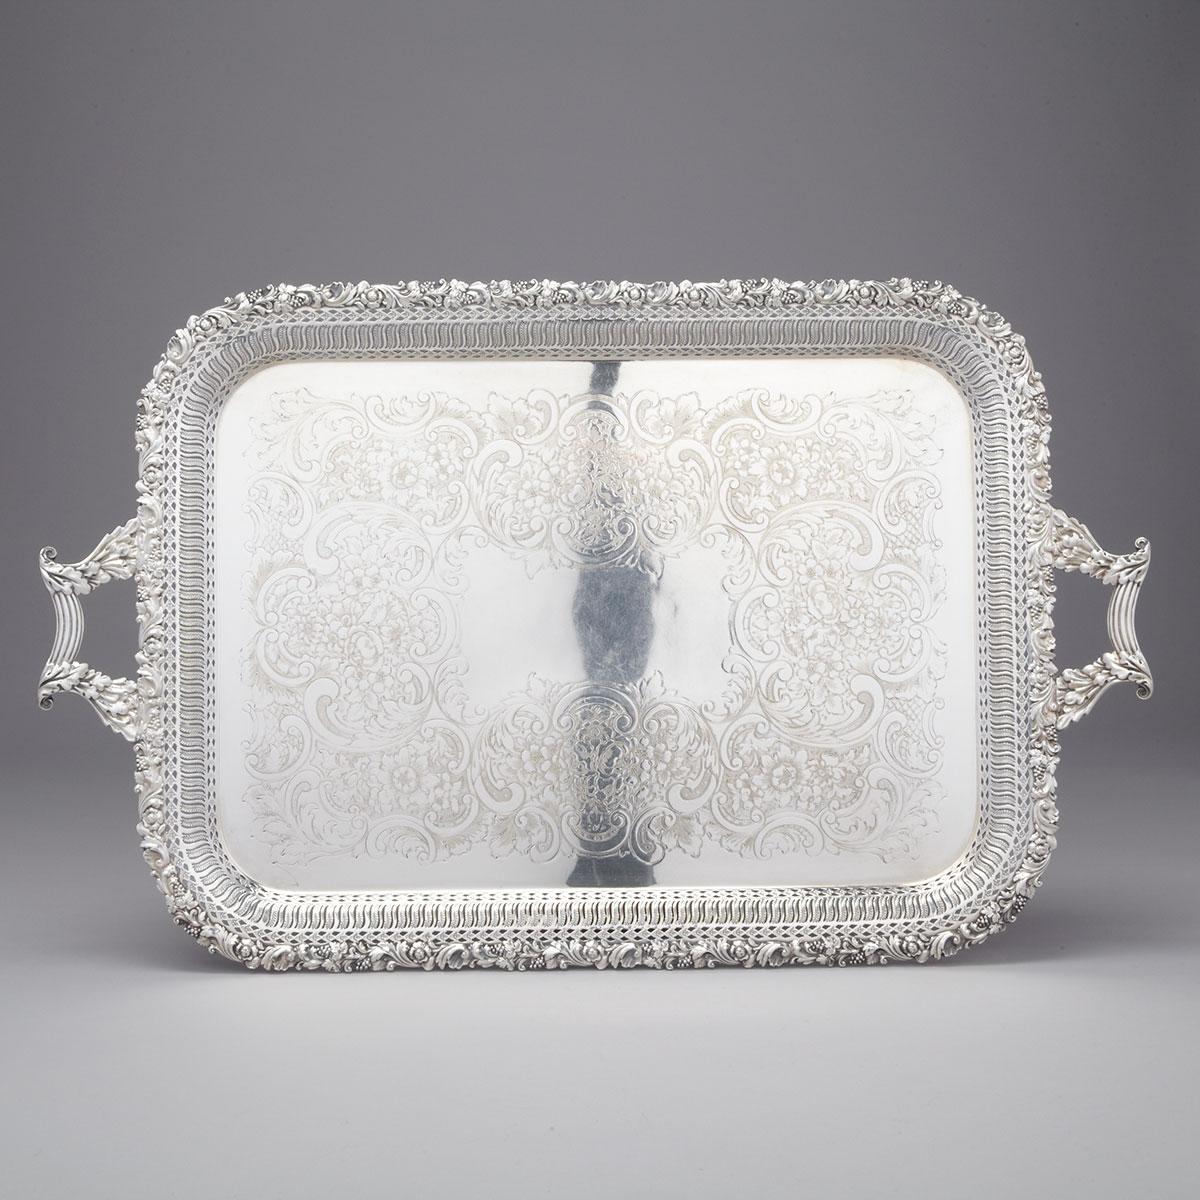 Silver Plated Two-Handled Rectangular Serving Tray, Ellis Bros., 20th century